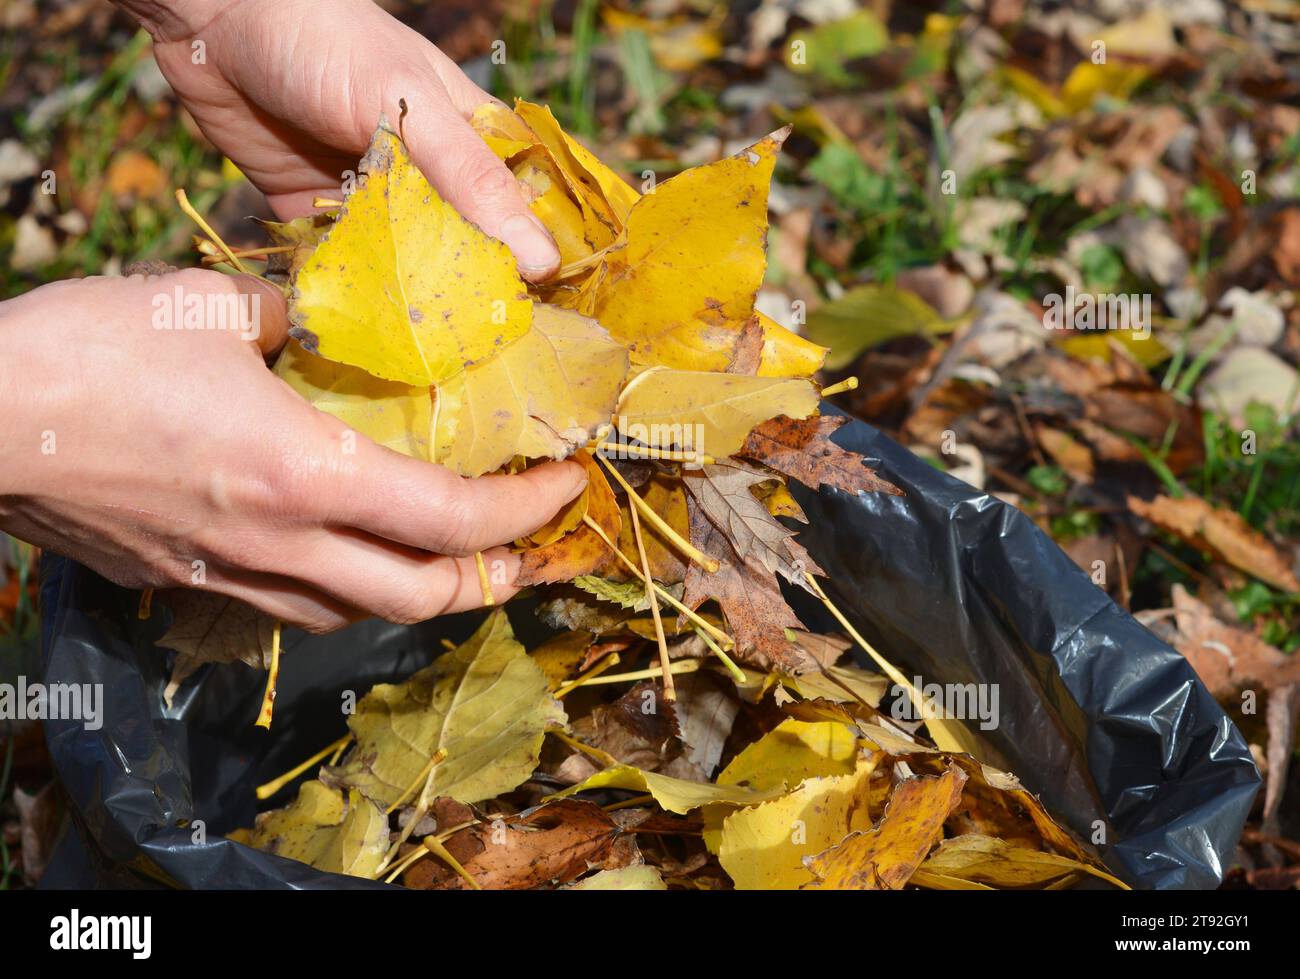 Gardener cleanup and collect colorful yellow fallen leaves in a black bag in the garden. Stock Photo